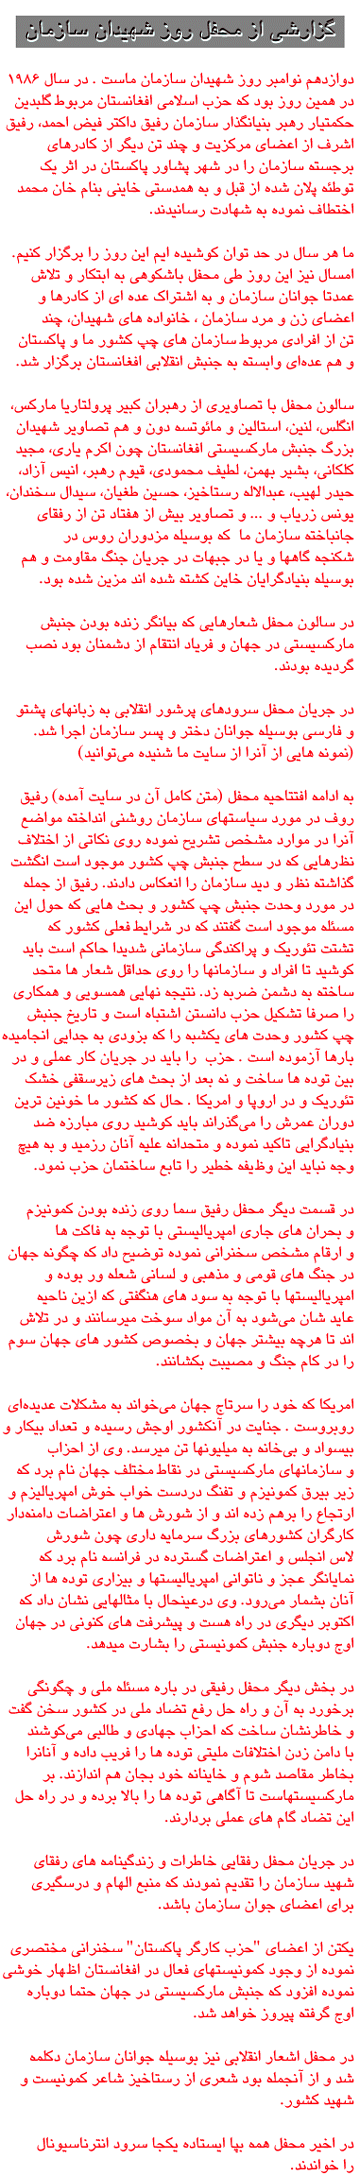 Farsi Report of a funcion to mark 12th of November the Martyres Day of ALO.